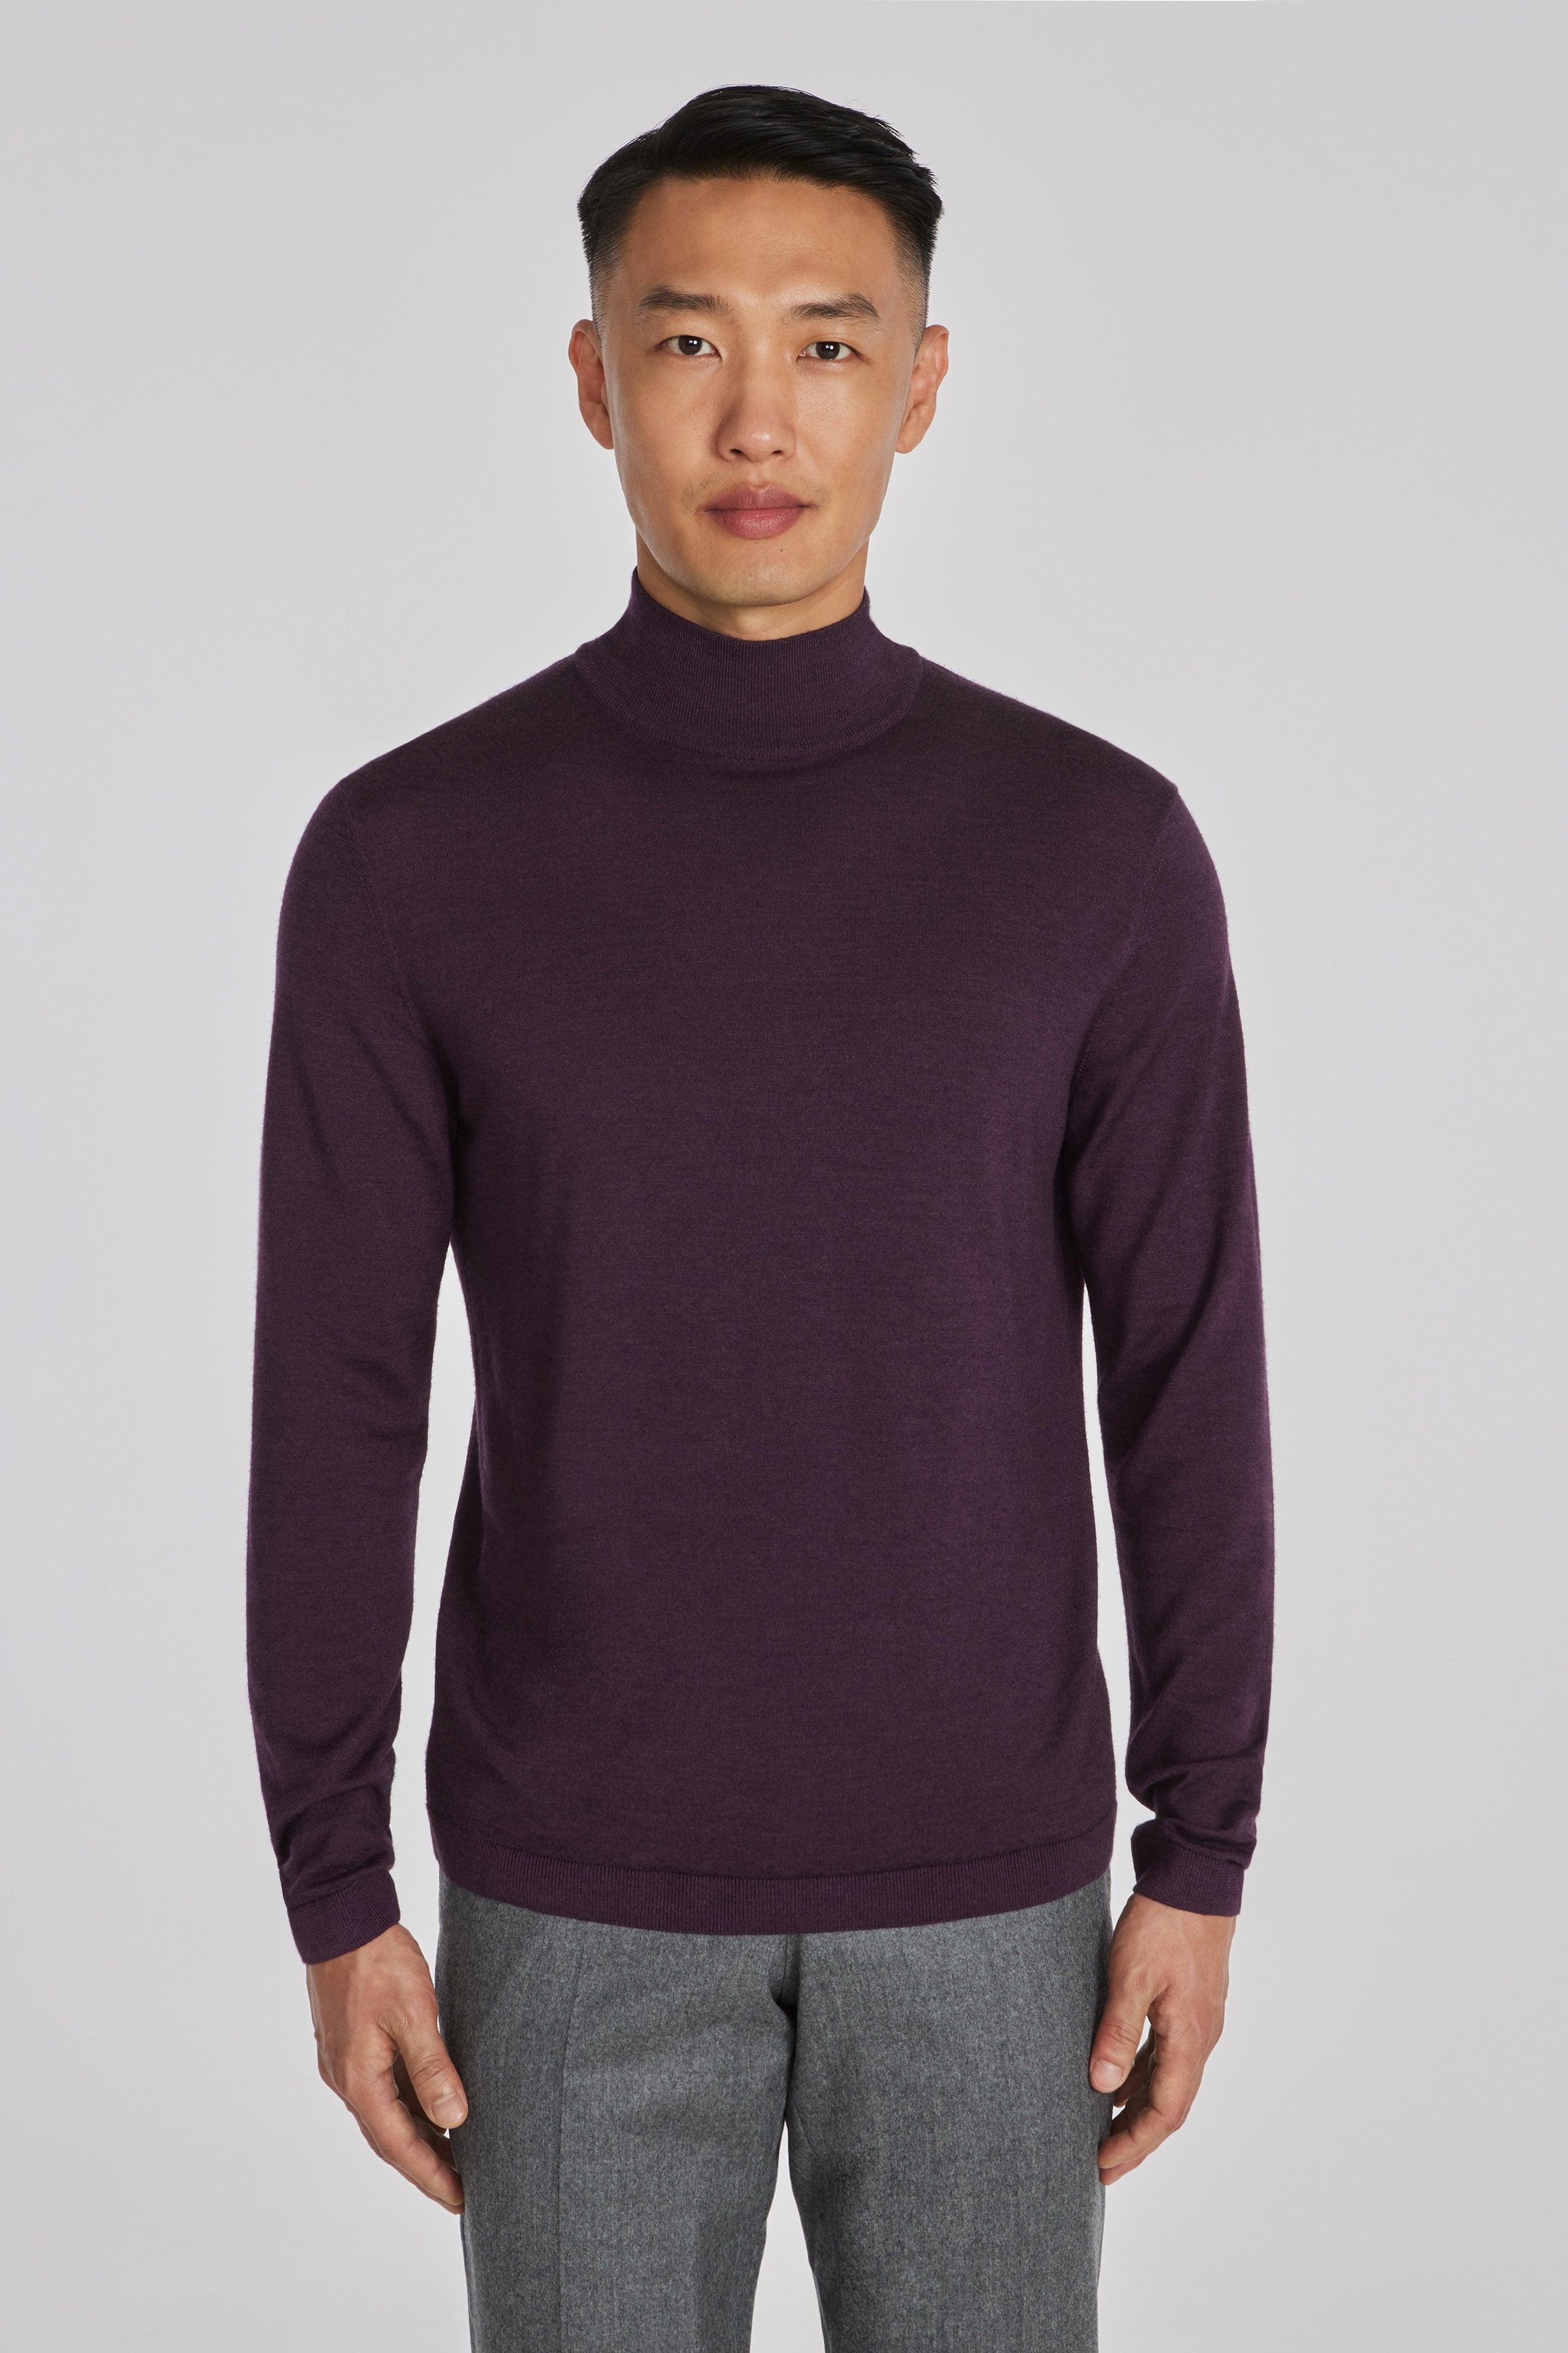 Alt view 1 Beaudry Wool, Silk and Cashmere Mock Neck Sweater in Plum